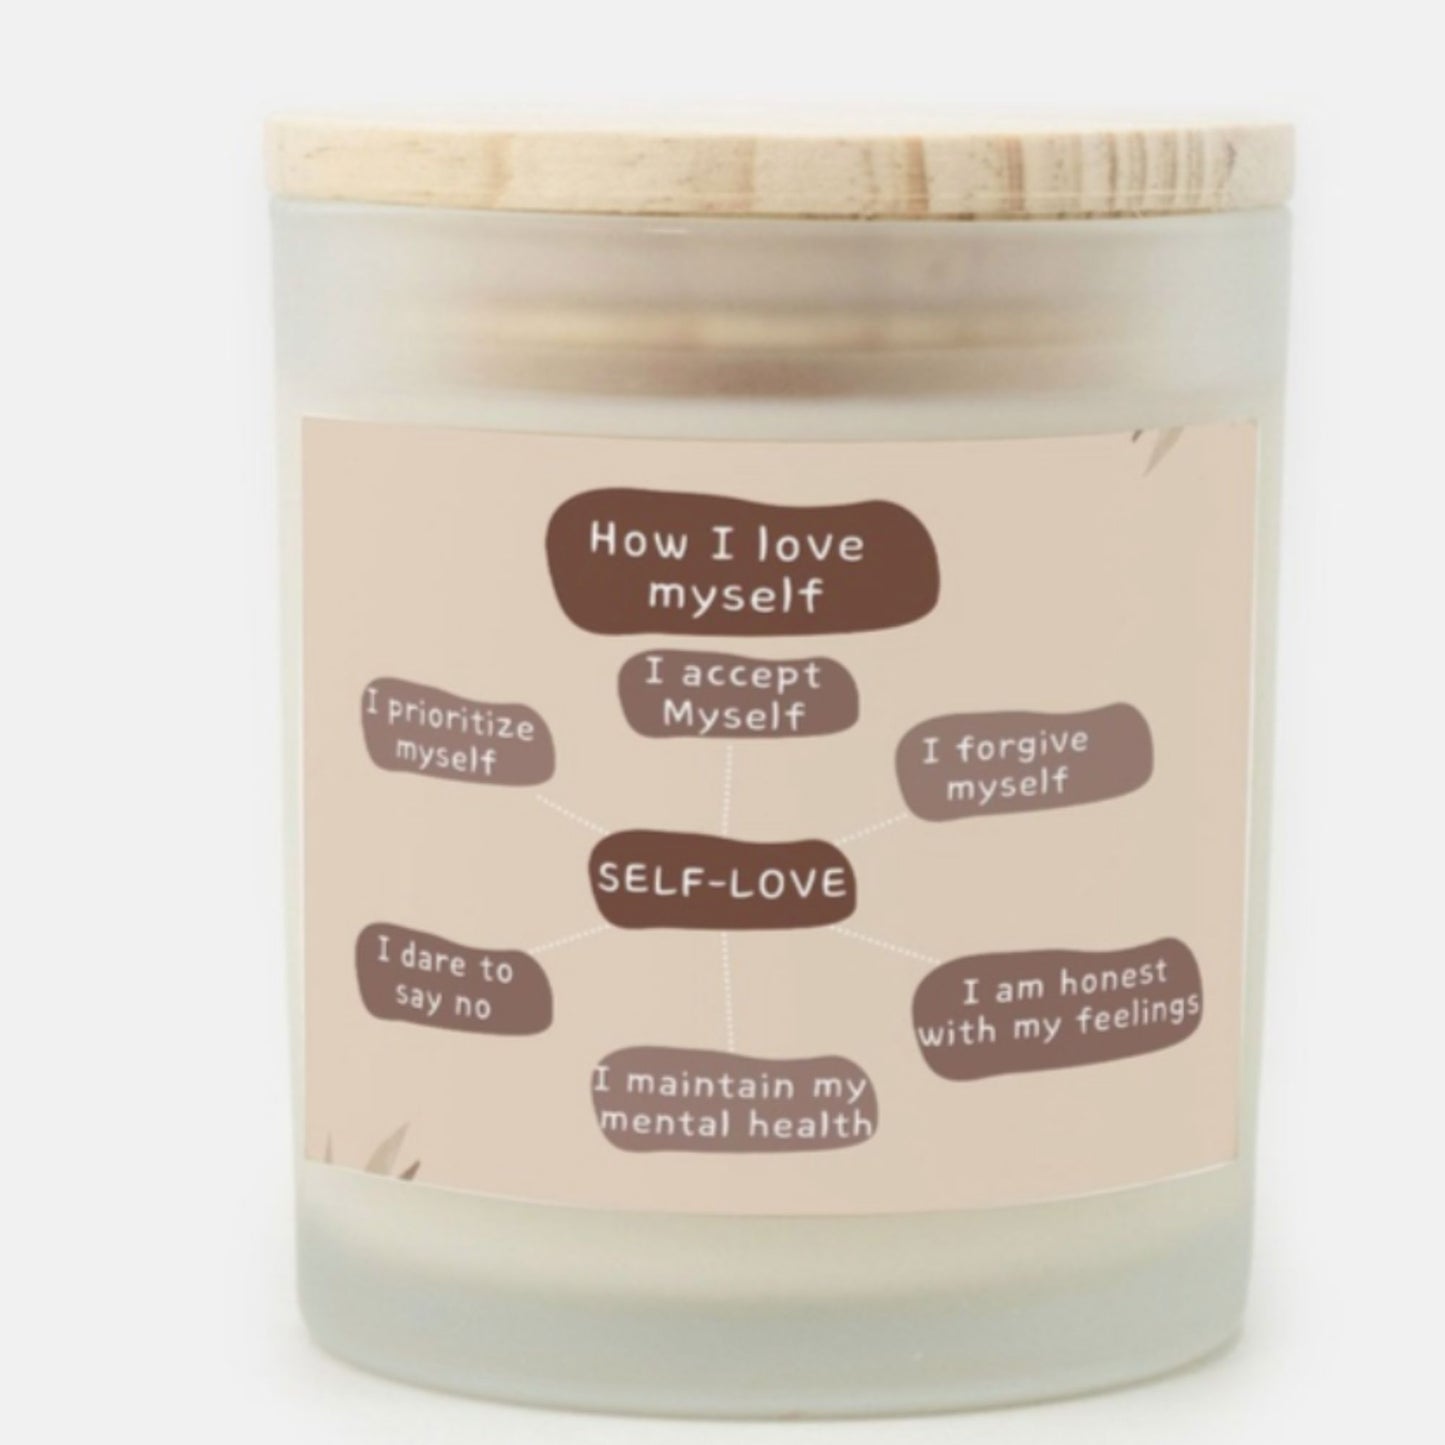 How I love Myself Candle Premium Non-Toxic Wood Wick Candle Frosted Glass (Hand Poured 11 oz)